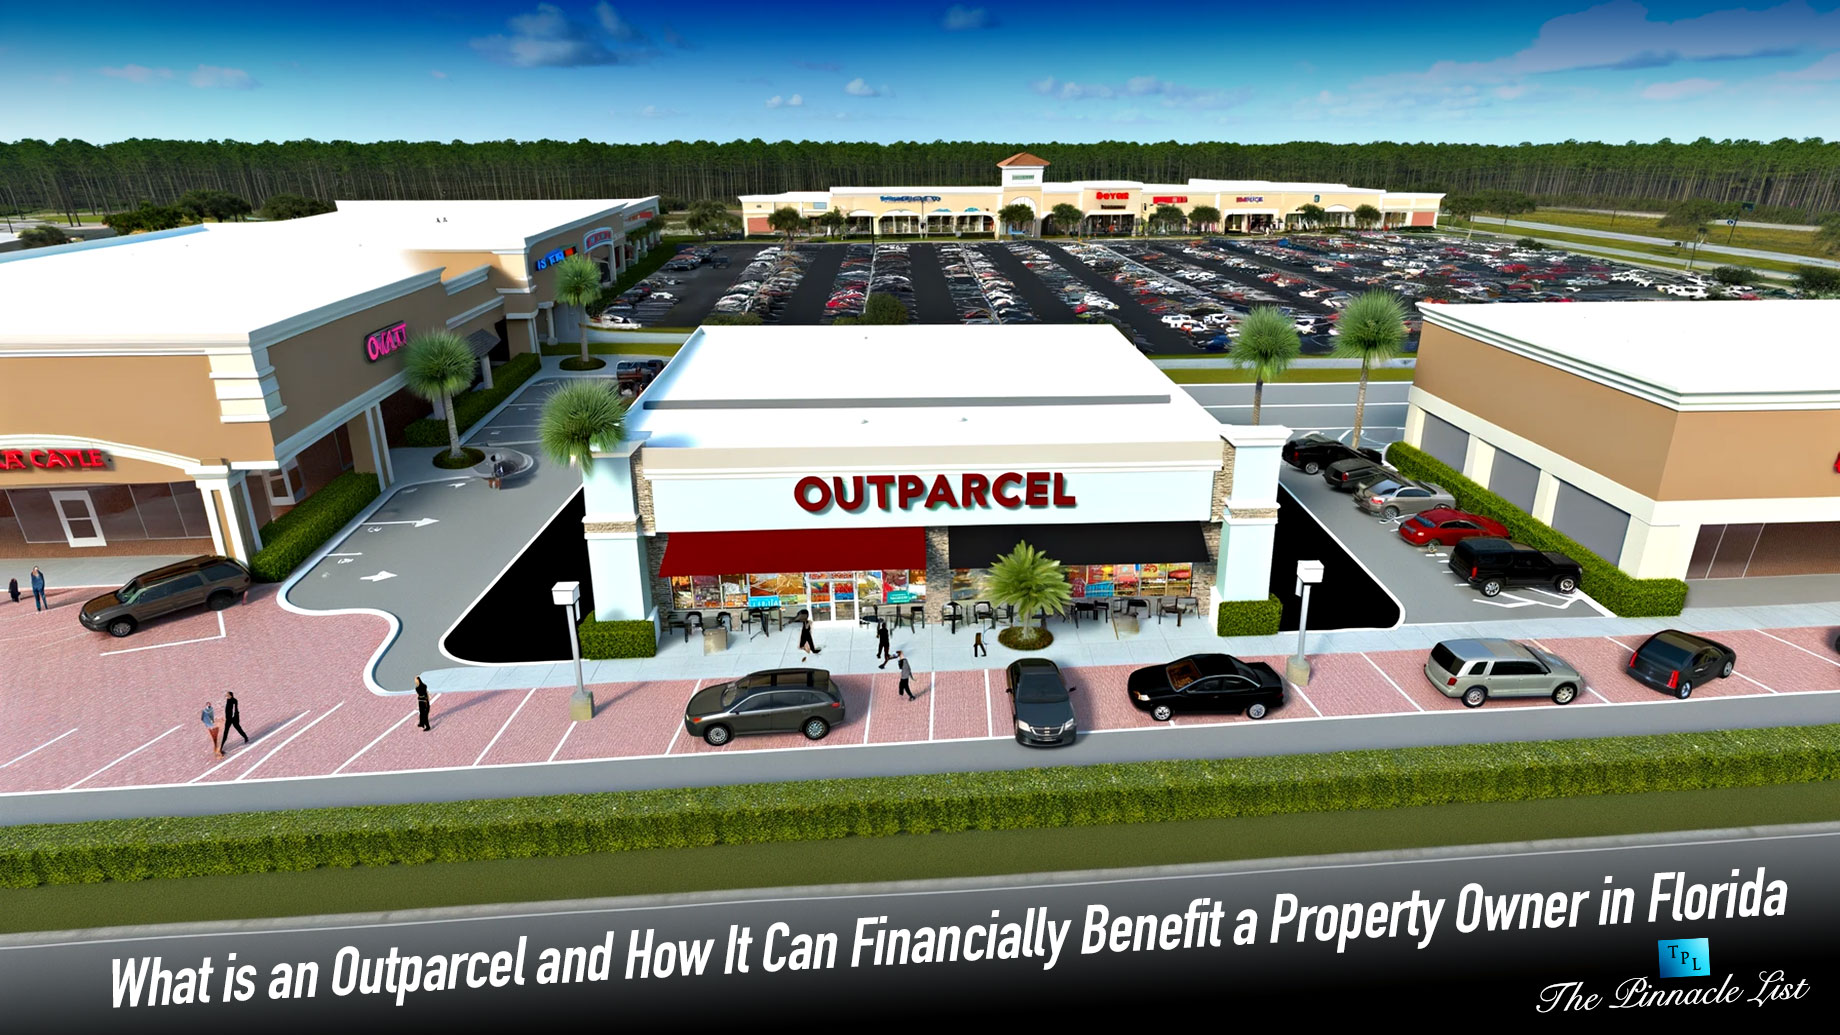 What is an Outparcel and How It Can Financially Benefit a Property Owner in Florida